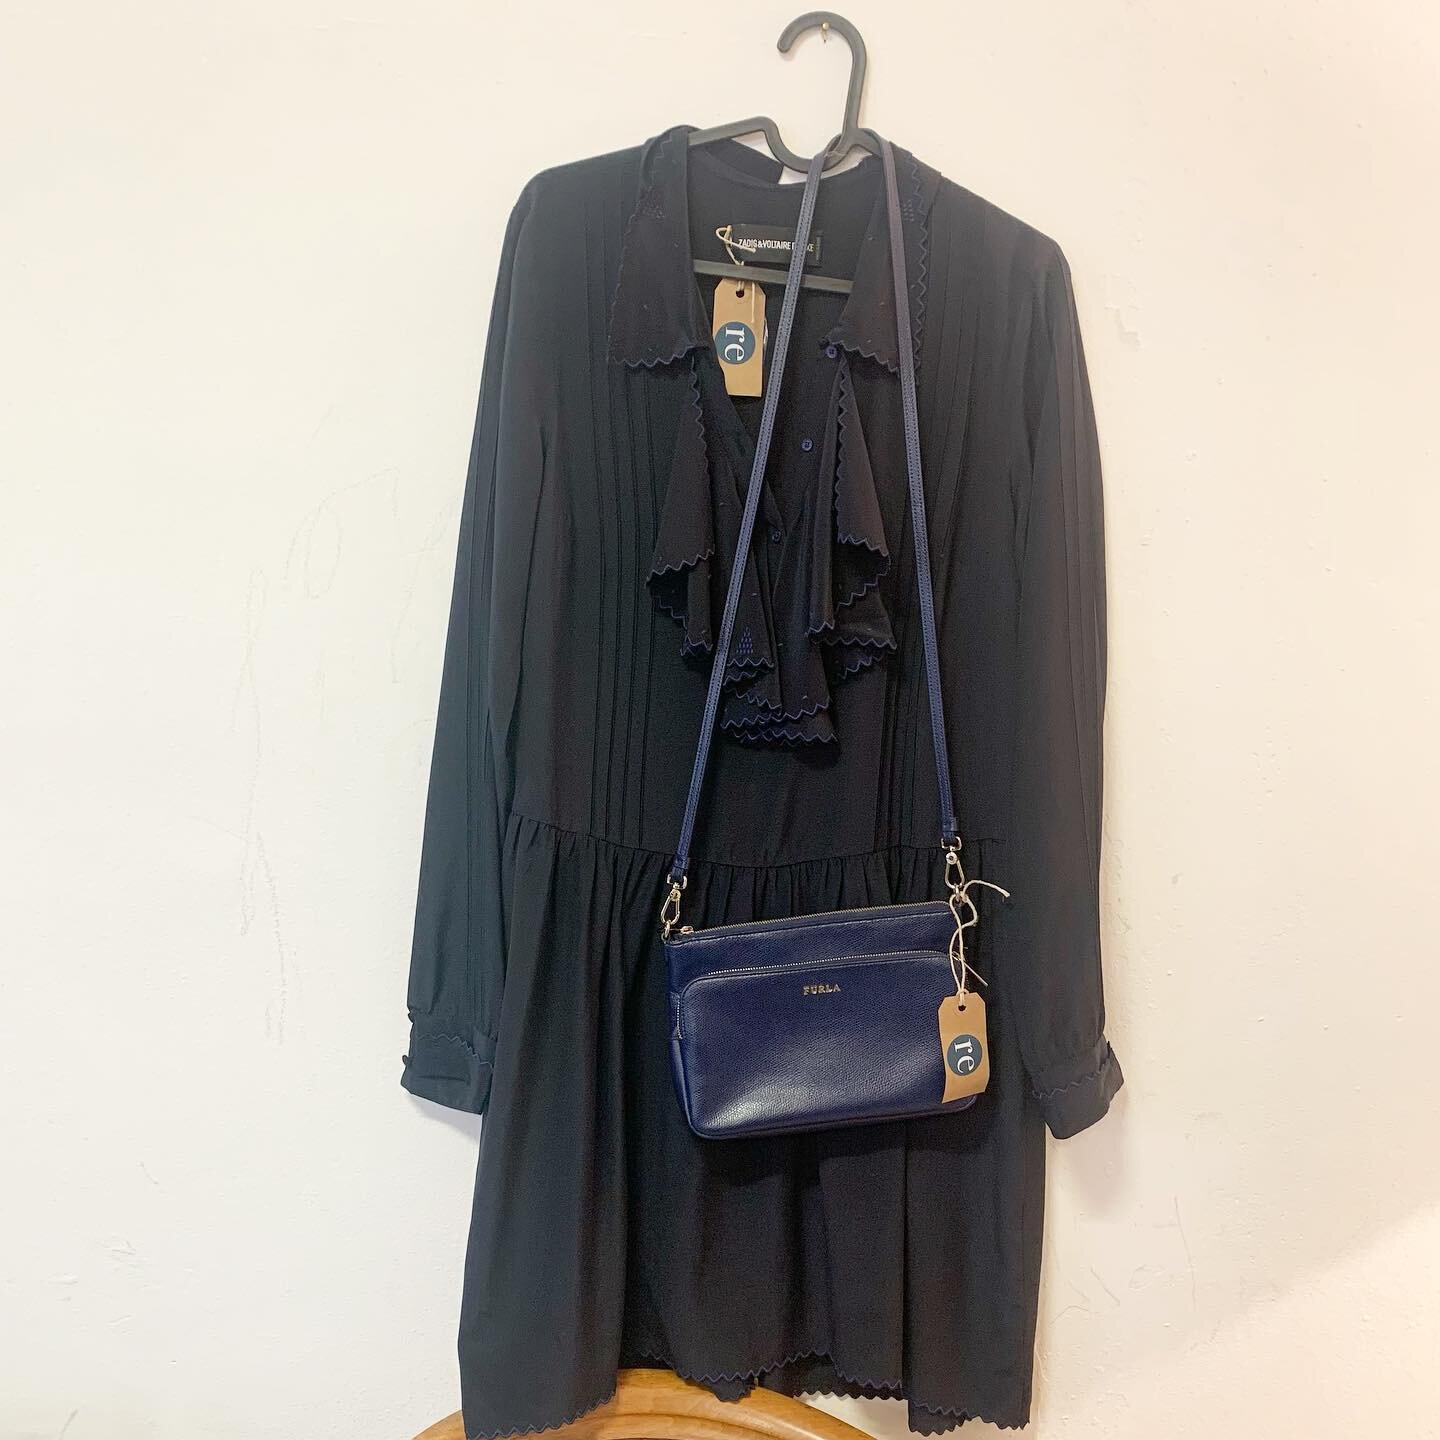 Night out ⭐️ 💎🥂

Robe Zadig &amp; Voltaire noire, bordures bleues / CHF 99.- 
Sac &agrave; main Furla bleu / CHF 79.- 
Talons noirs/bleus Karine Arabian / taille 40 / CHF 199.- 
.
.
.

#revive #reviveforgood #betterclothesforless #circularfashion #